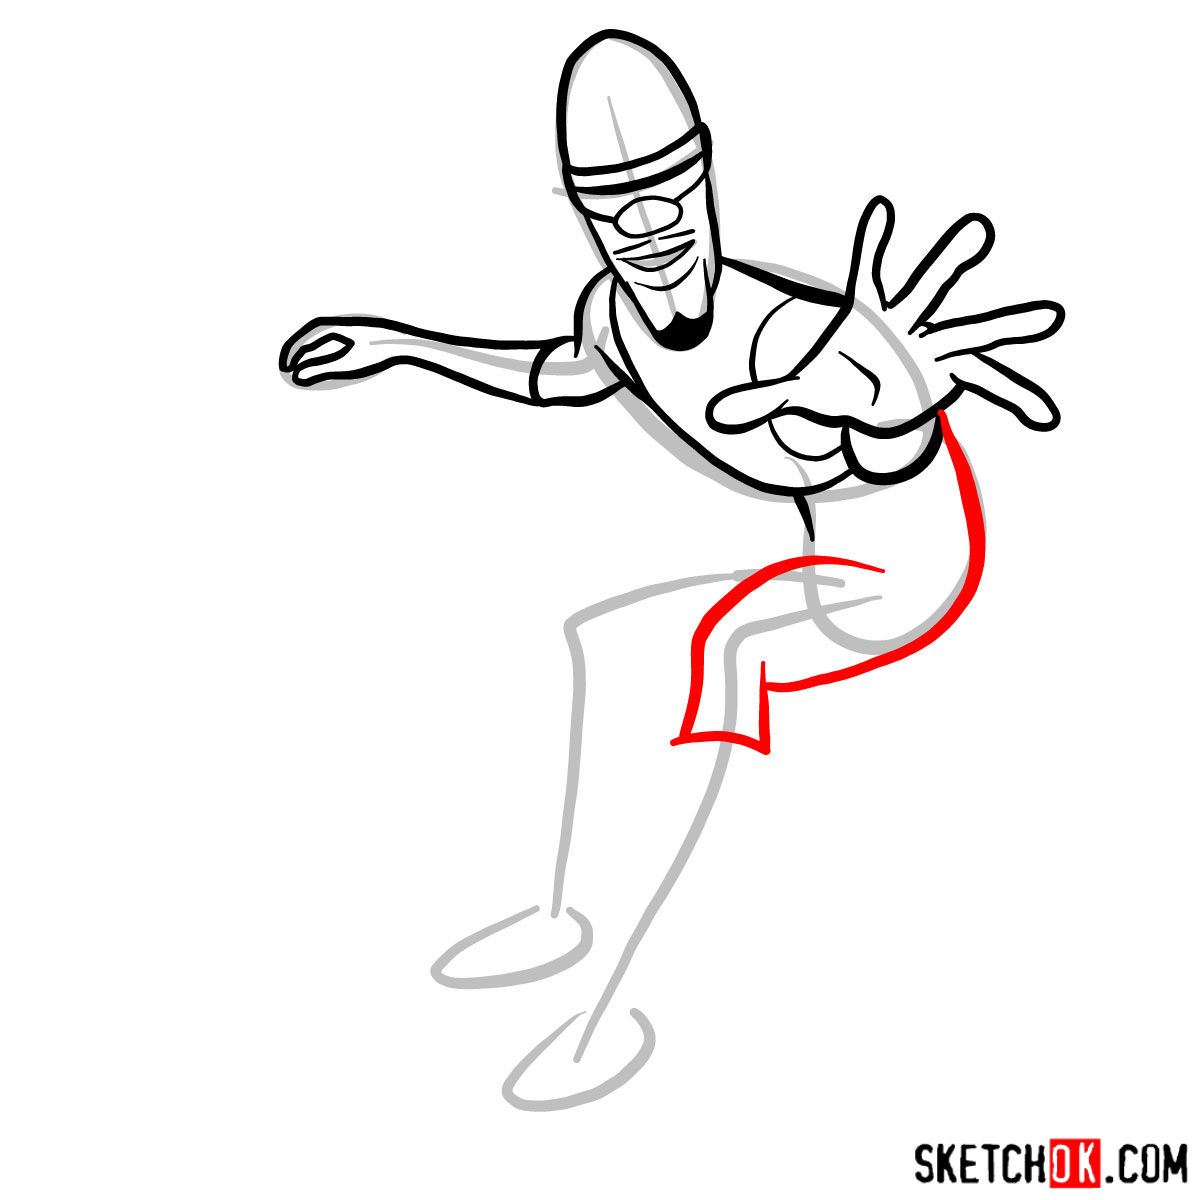 How to draw Lucius Best (Frozone) - step 08